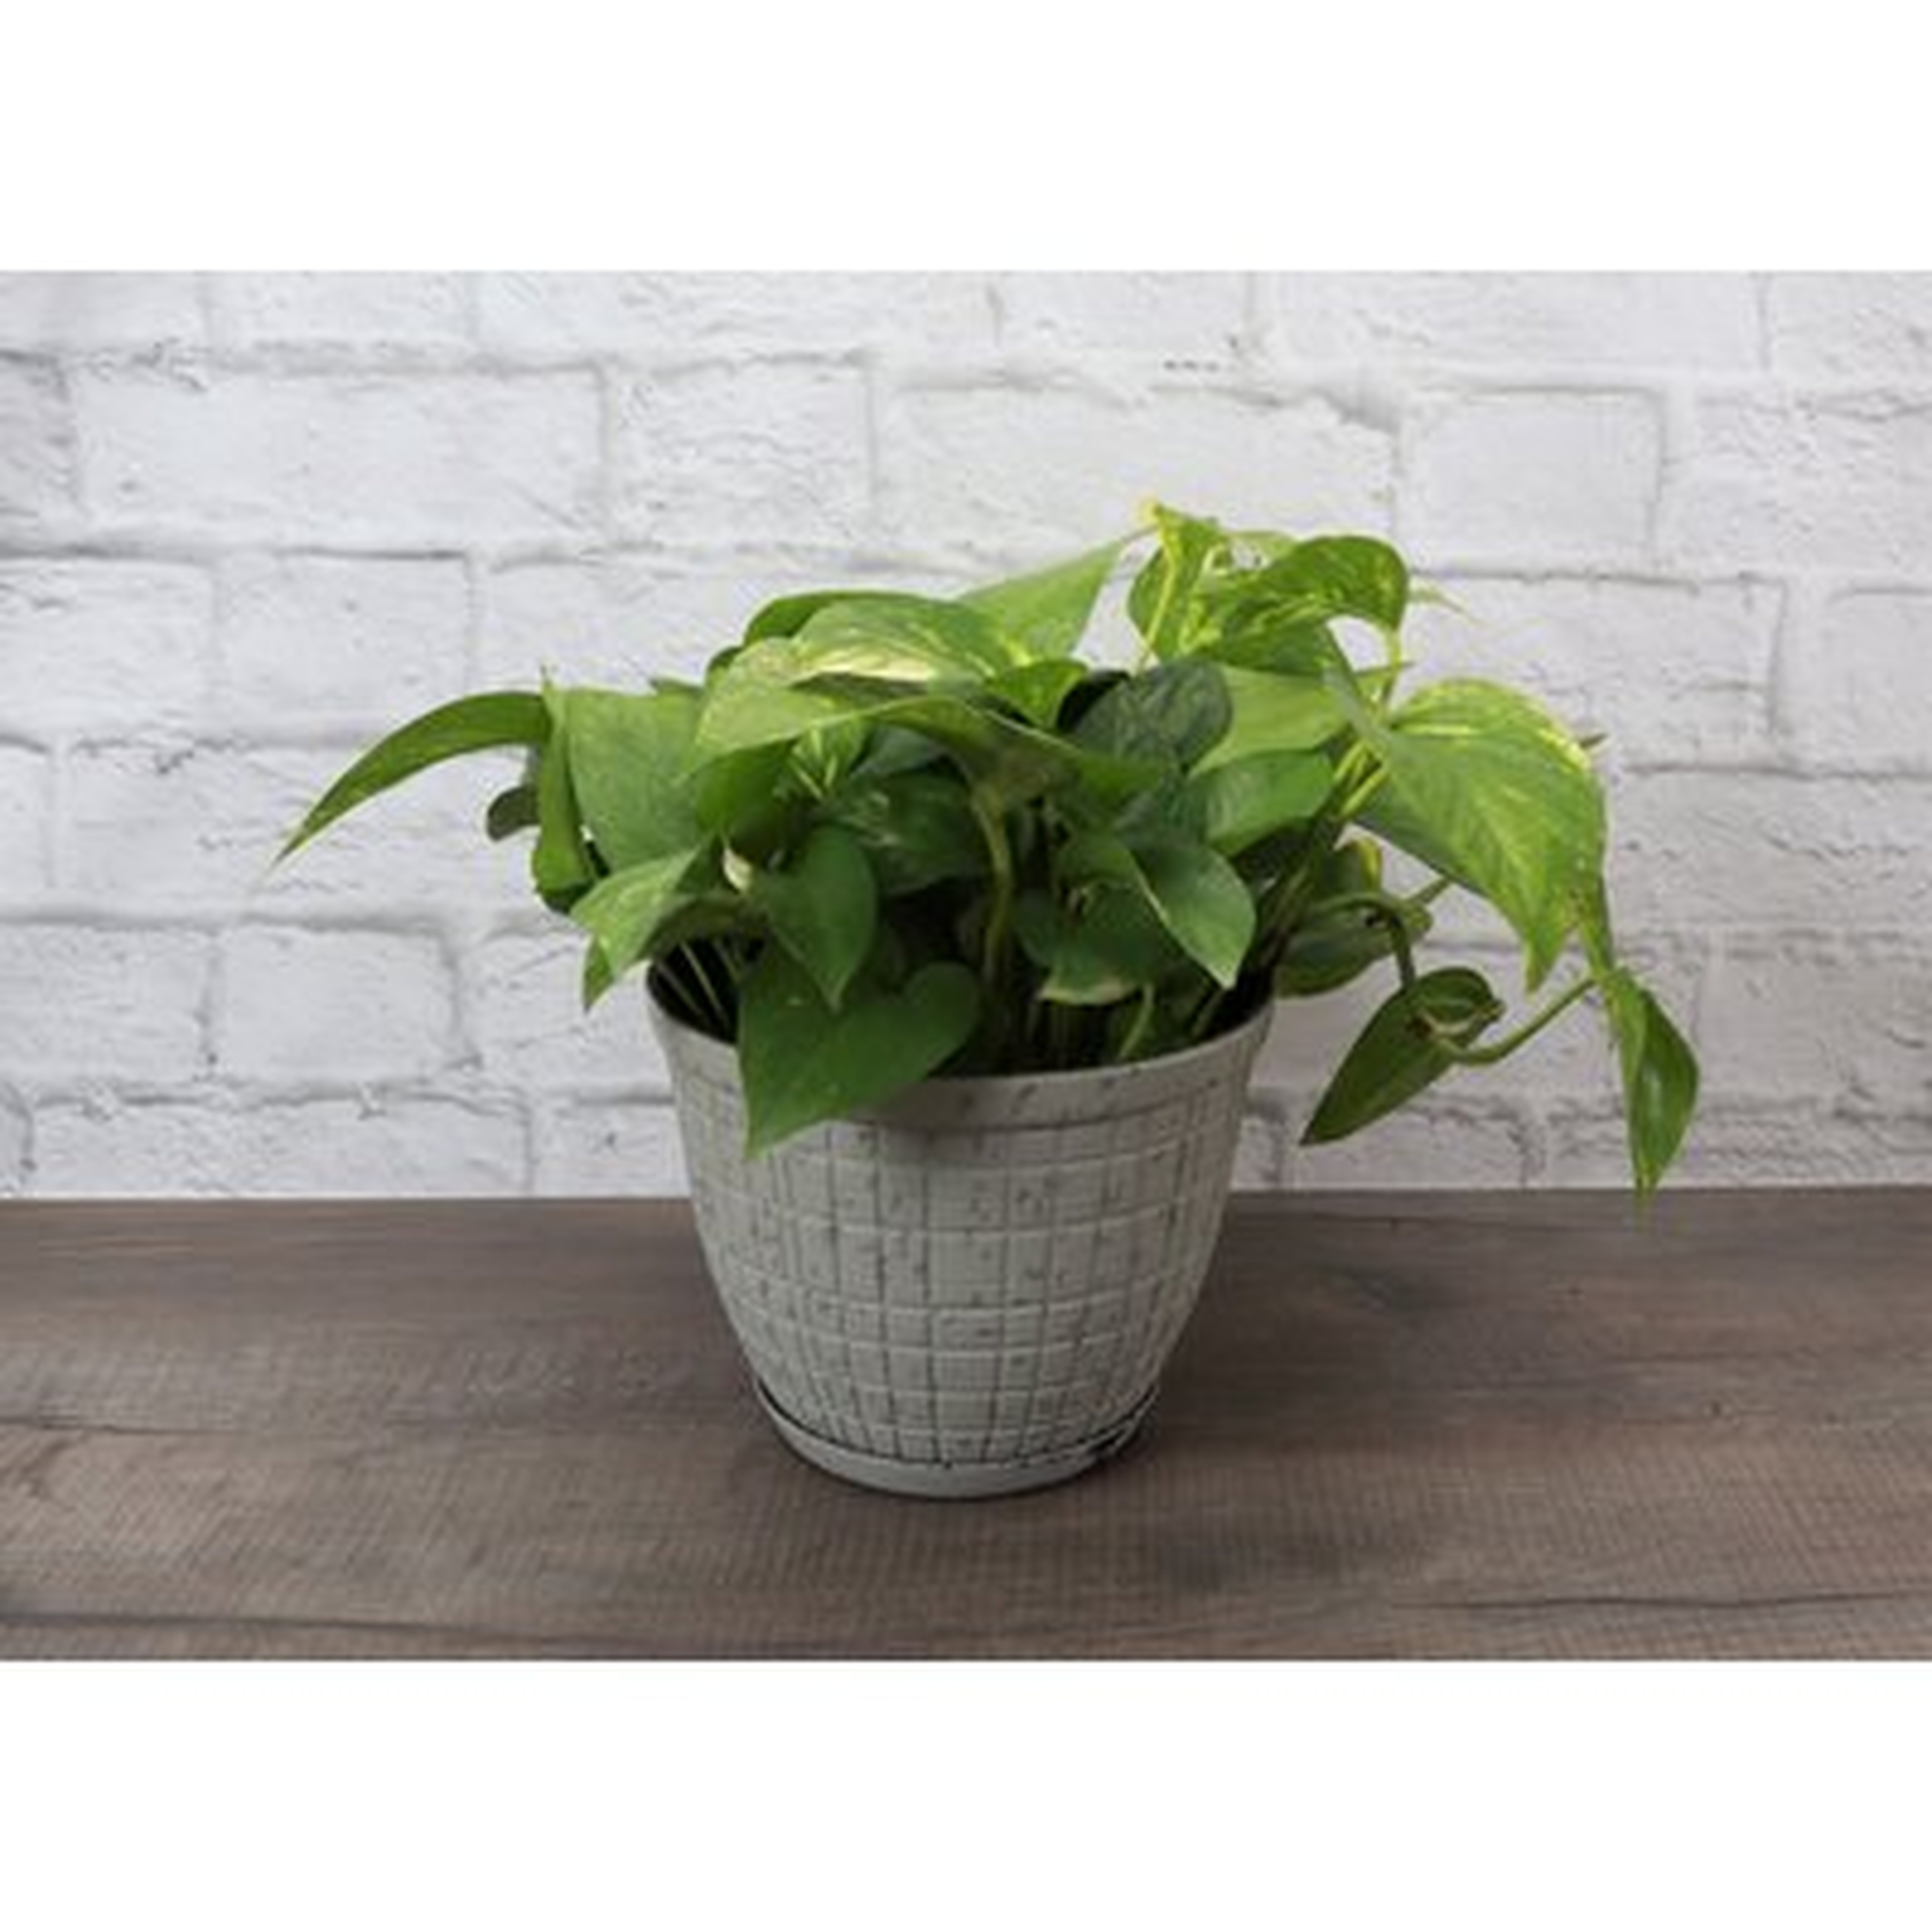 Thorsen's Greenhouse 8'' Philodendron Plant Desktop Plant in a Plastic Pot for Outdoor Use, White Pot - Wayfair